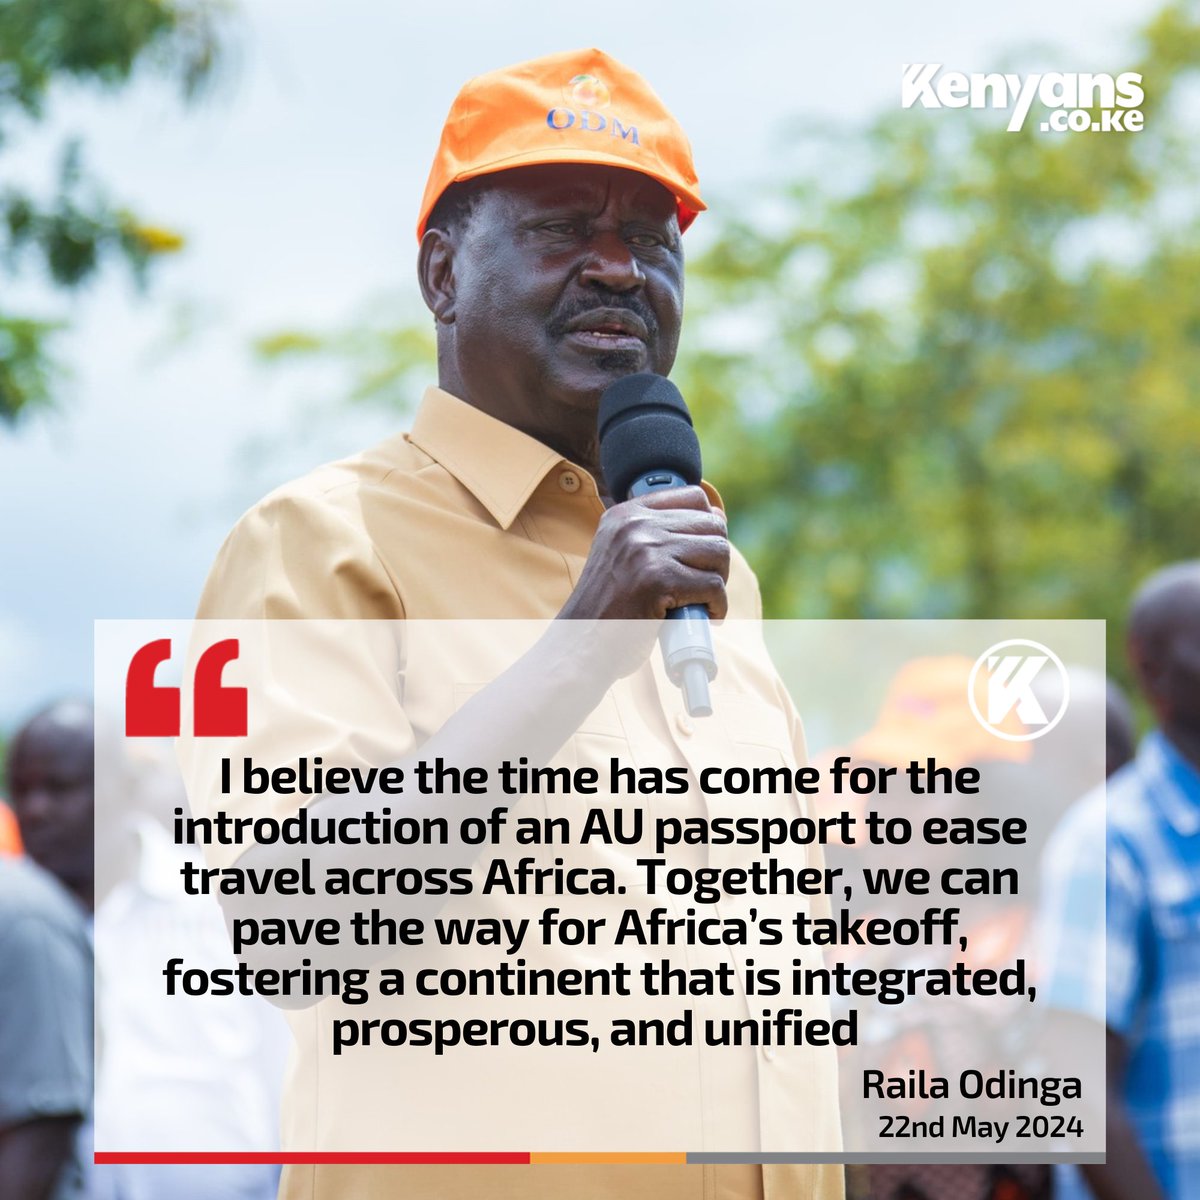 I believe the time has come for the introduction of an AU passport to ease travel across Africa - Raila Odinga